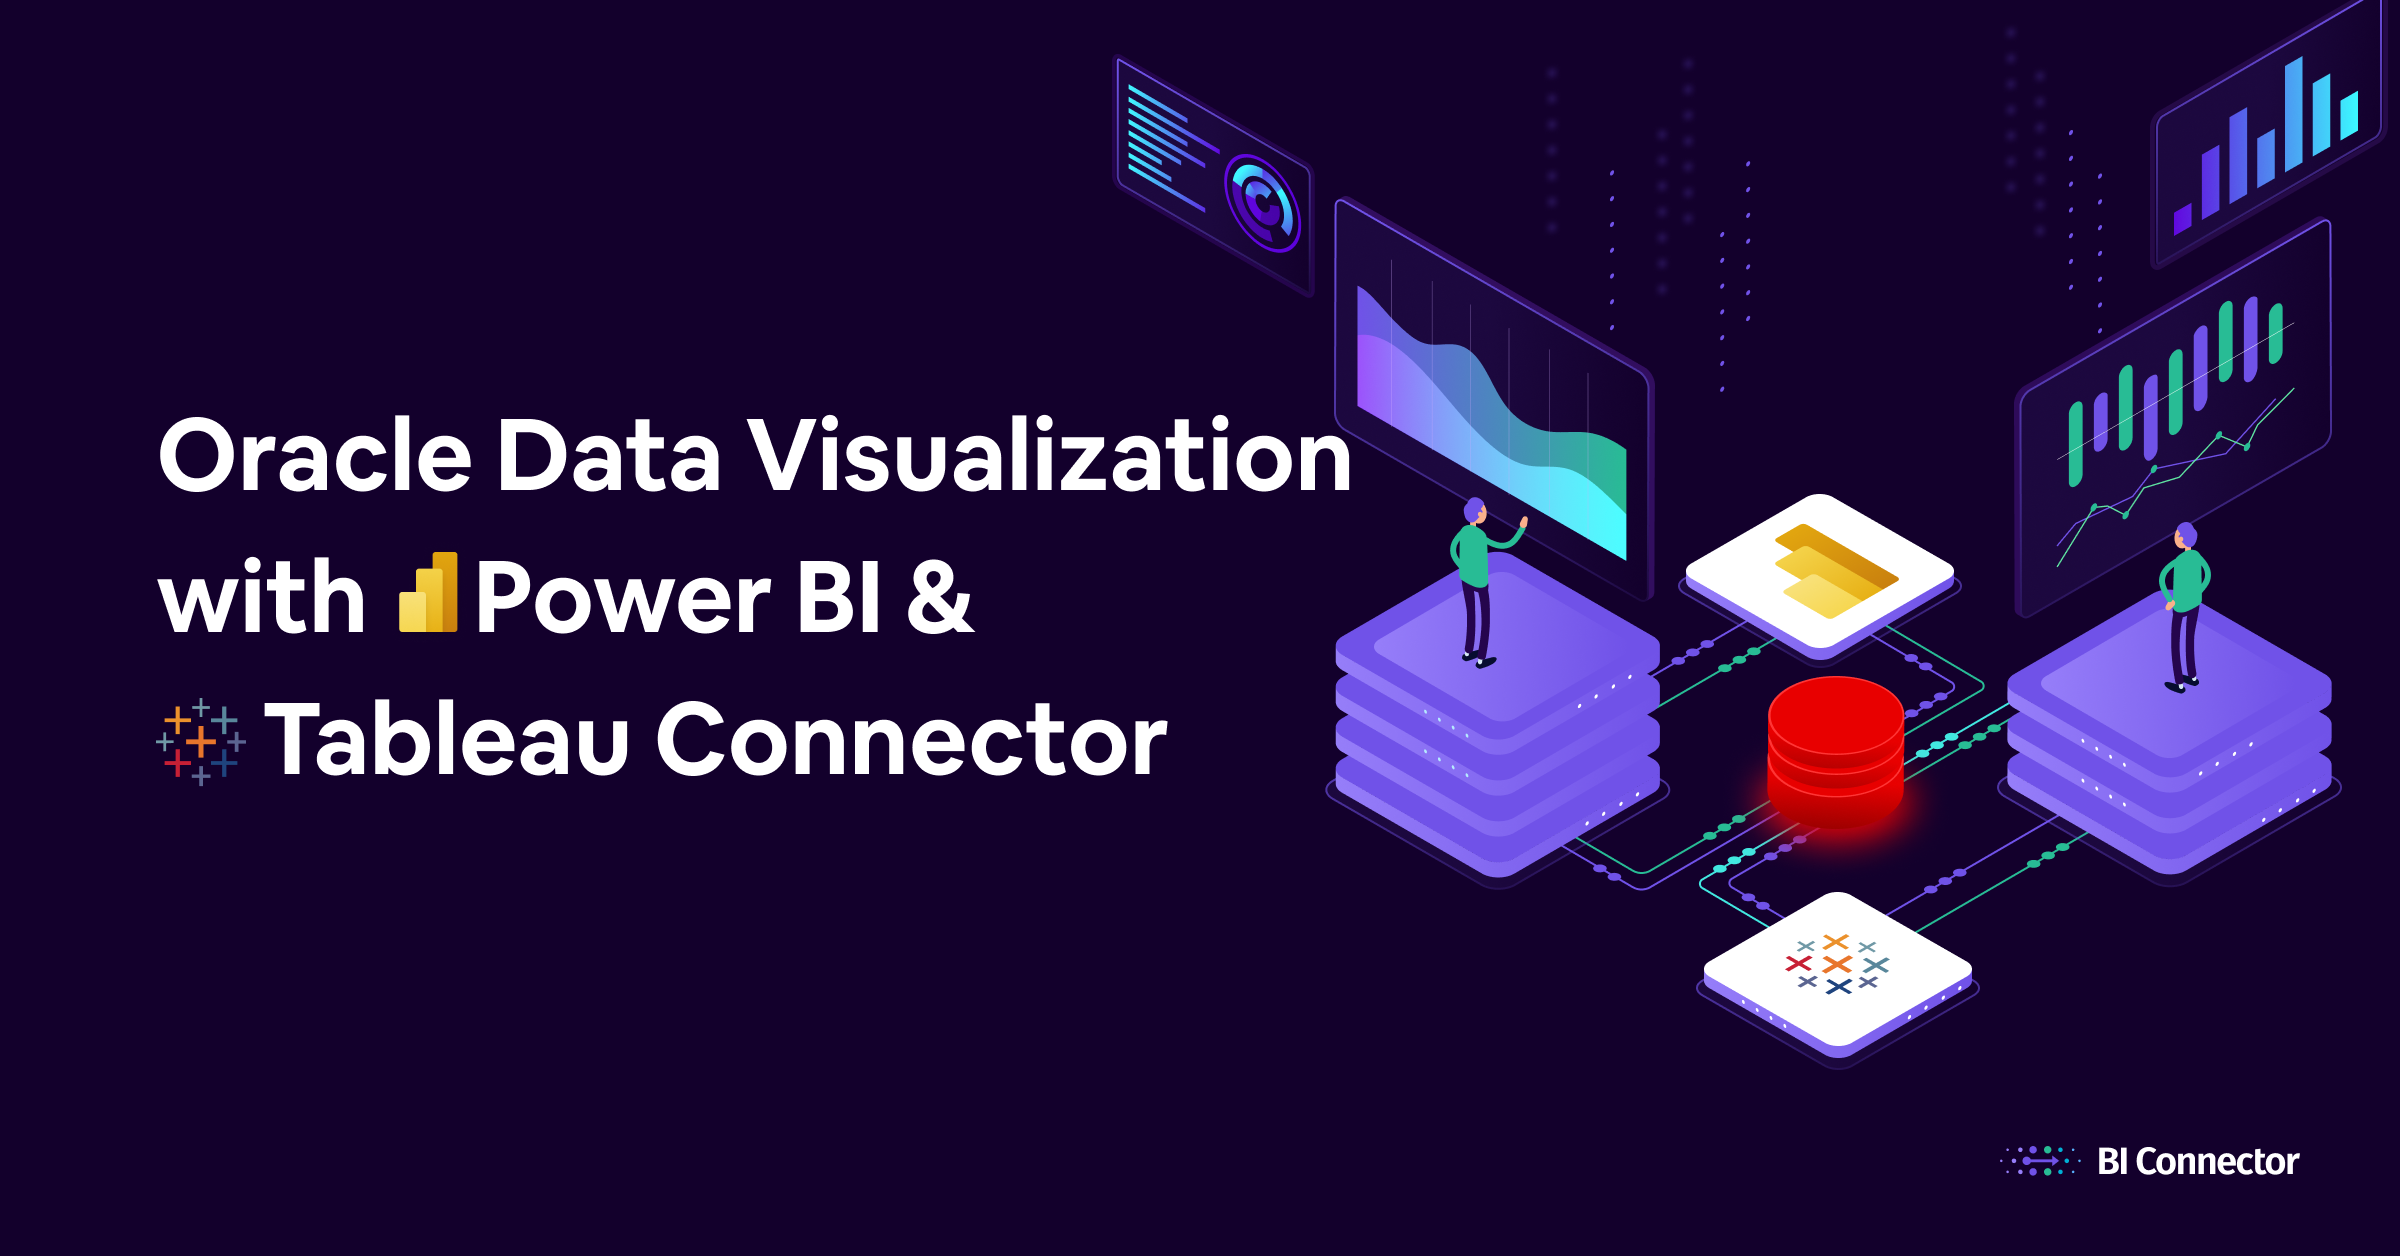 BI Connector Oracle Data Visualization with Power_BI and Tableau Connector